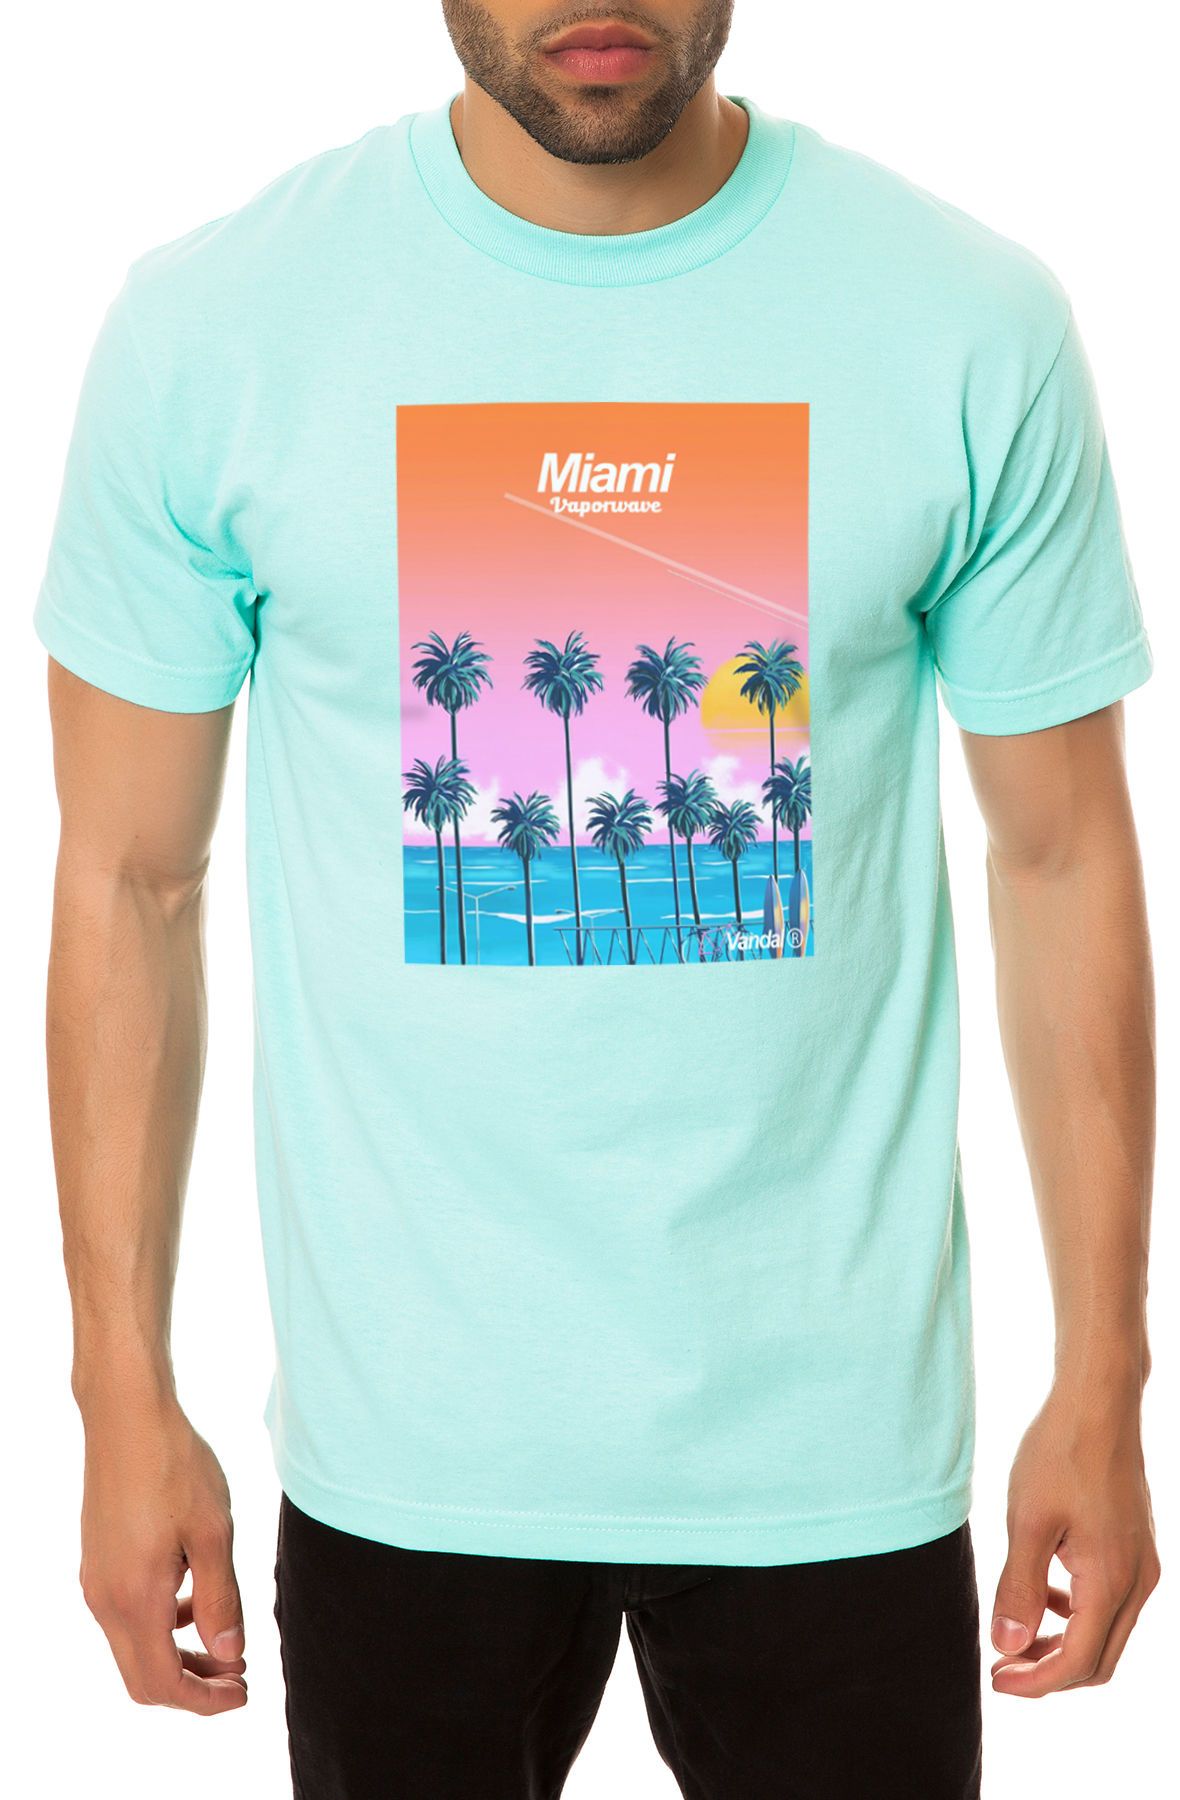 The Miami Vaporwave Tee in Mint